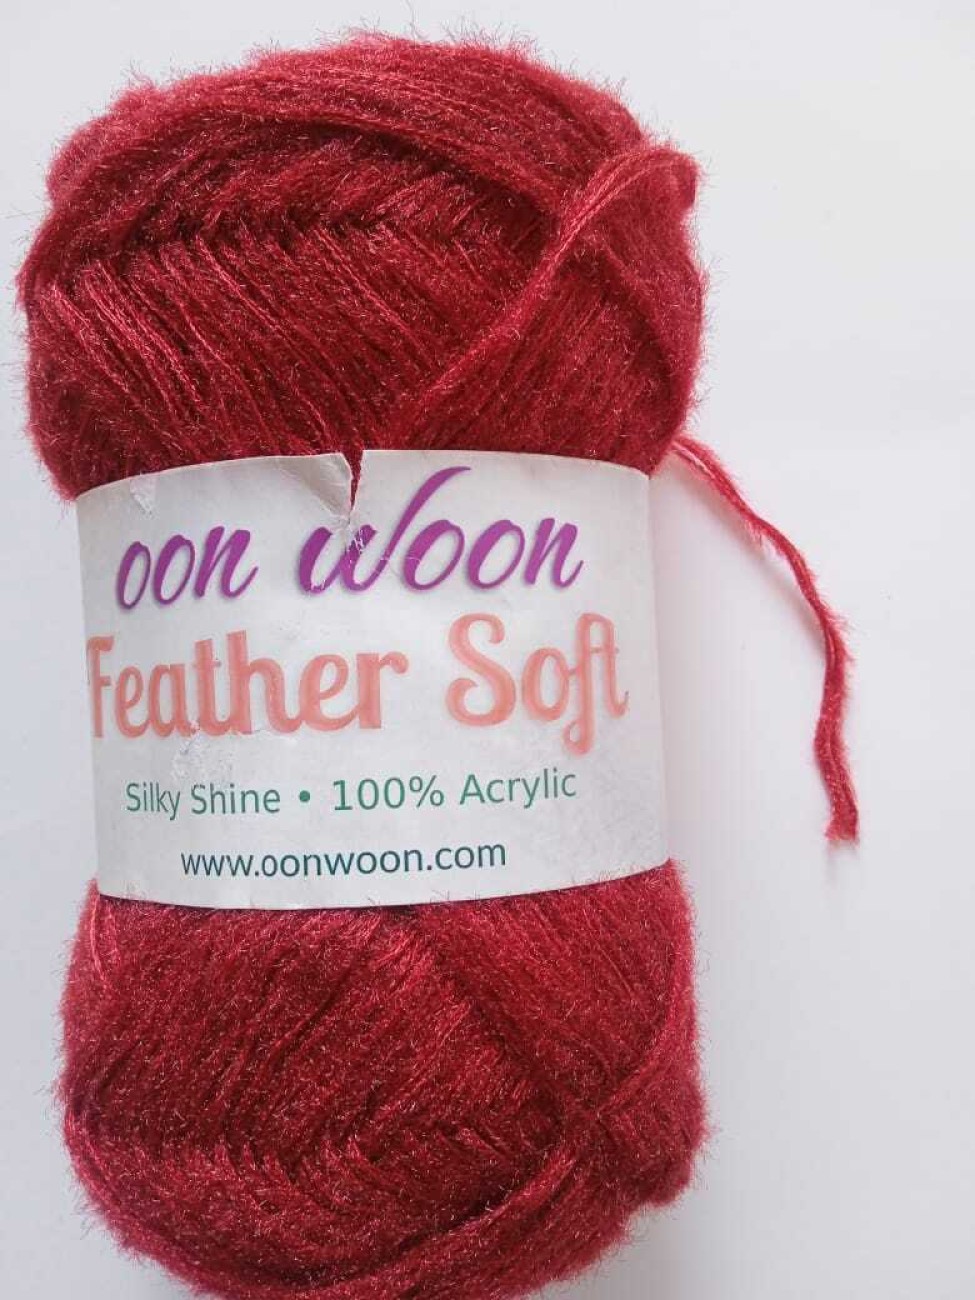 Oon Woon Feather Soft Knitting Yarn Wool for Knitting, Hand